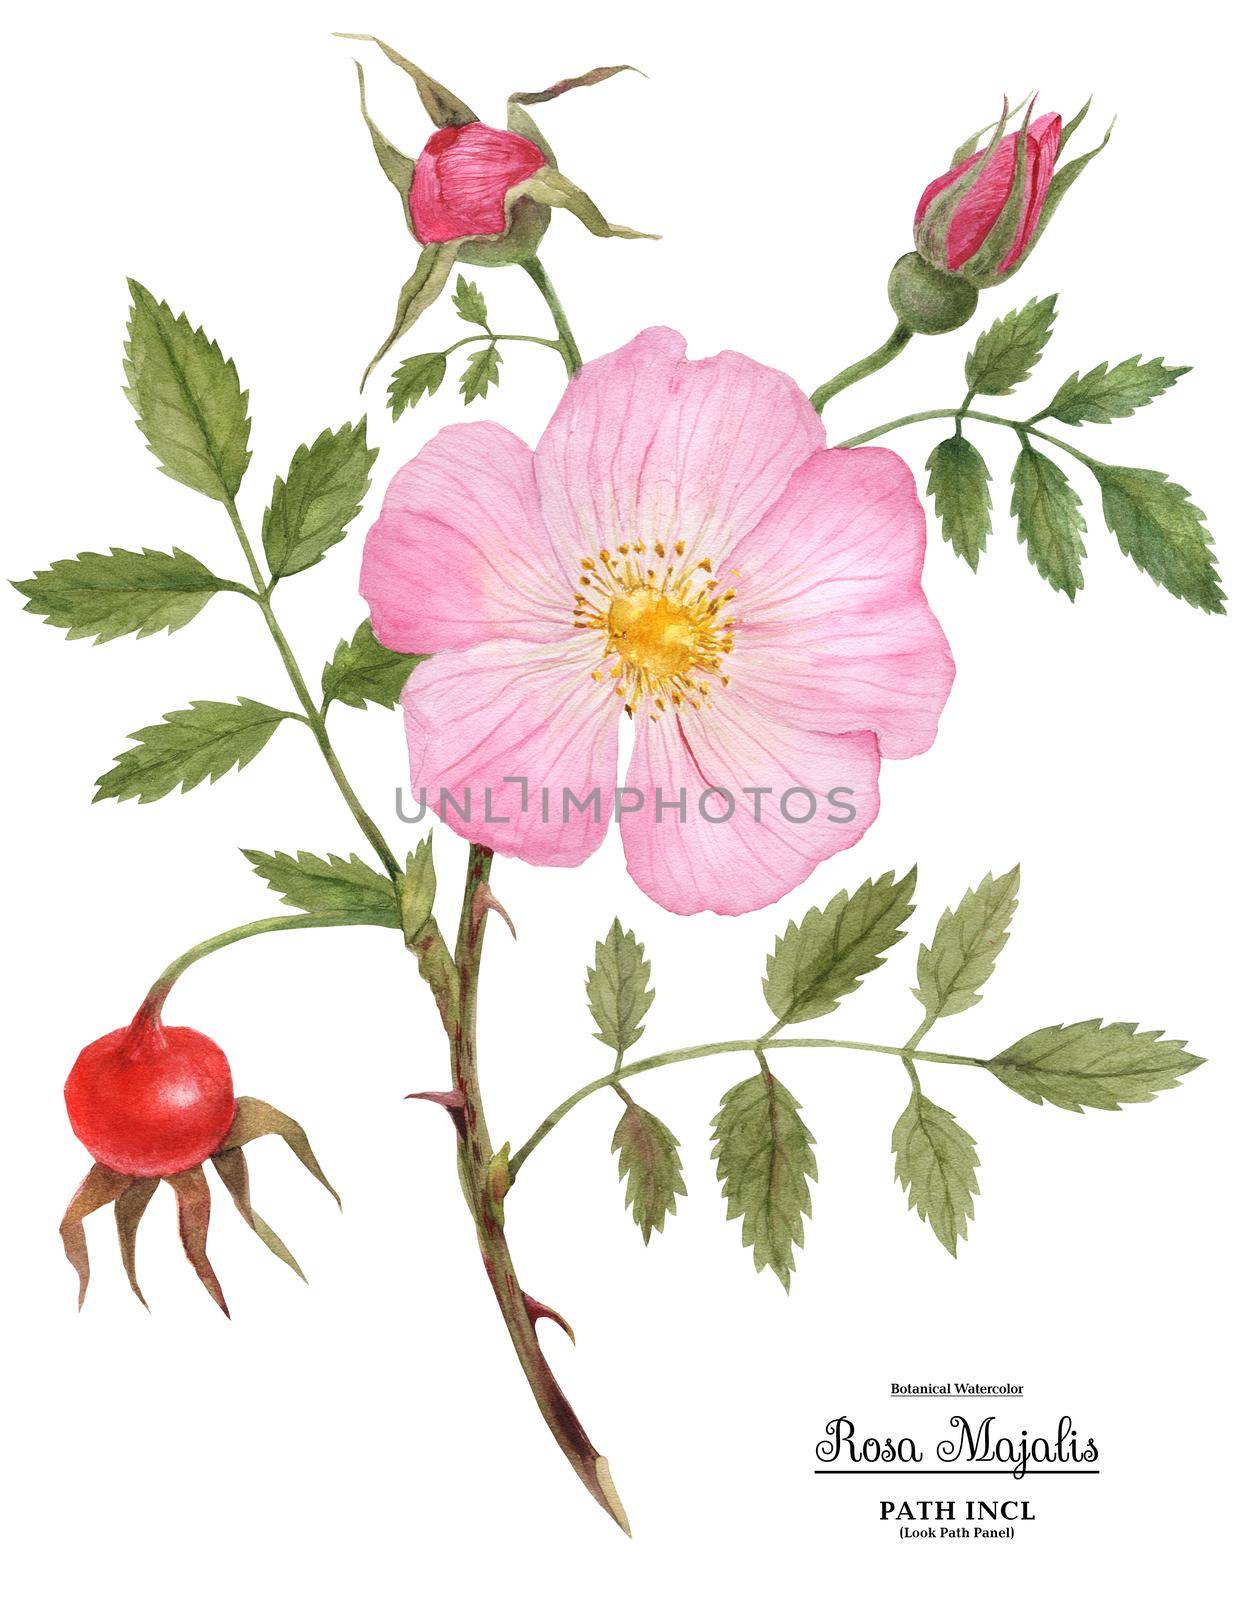 Watercolor illustration Wild Rose (Cinnamon Rose) flower, fruit and buds on a branch. Isolated, path included